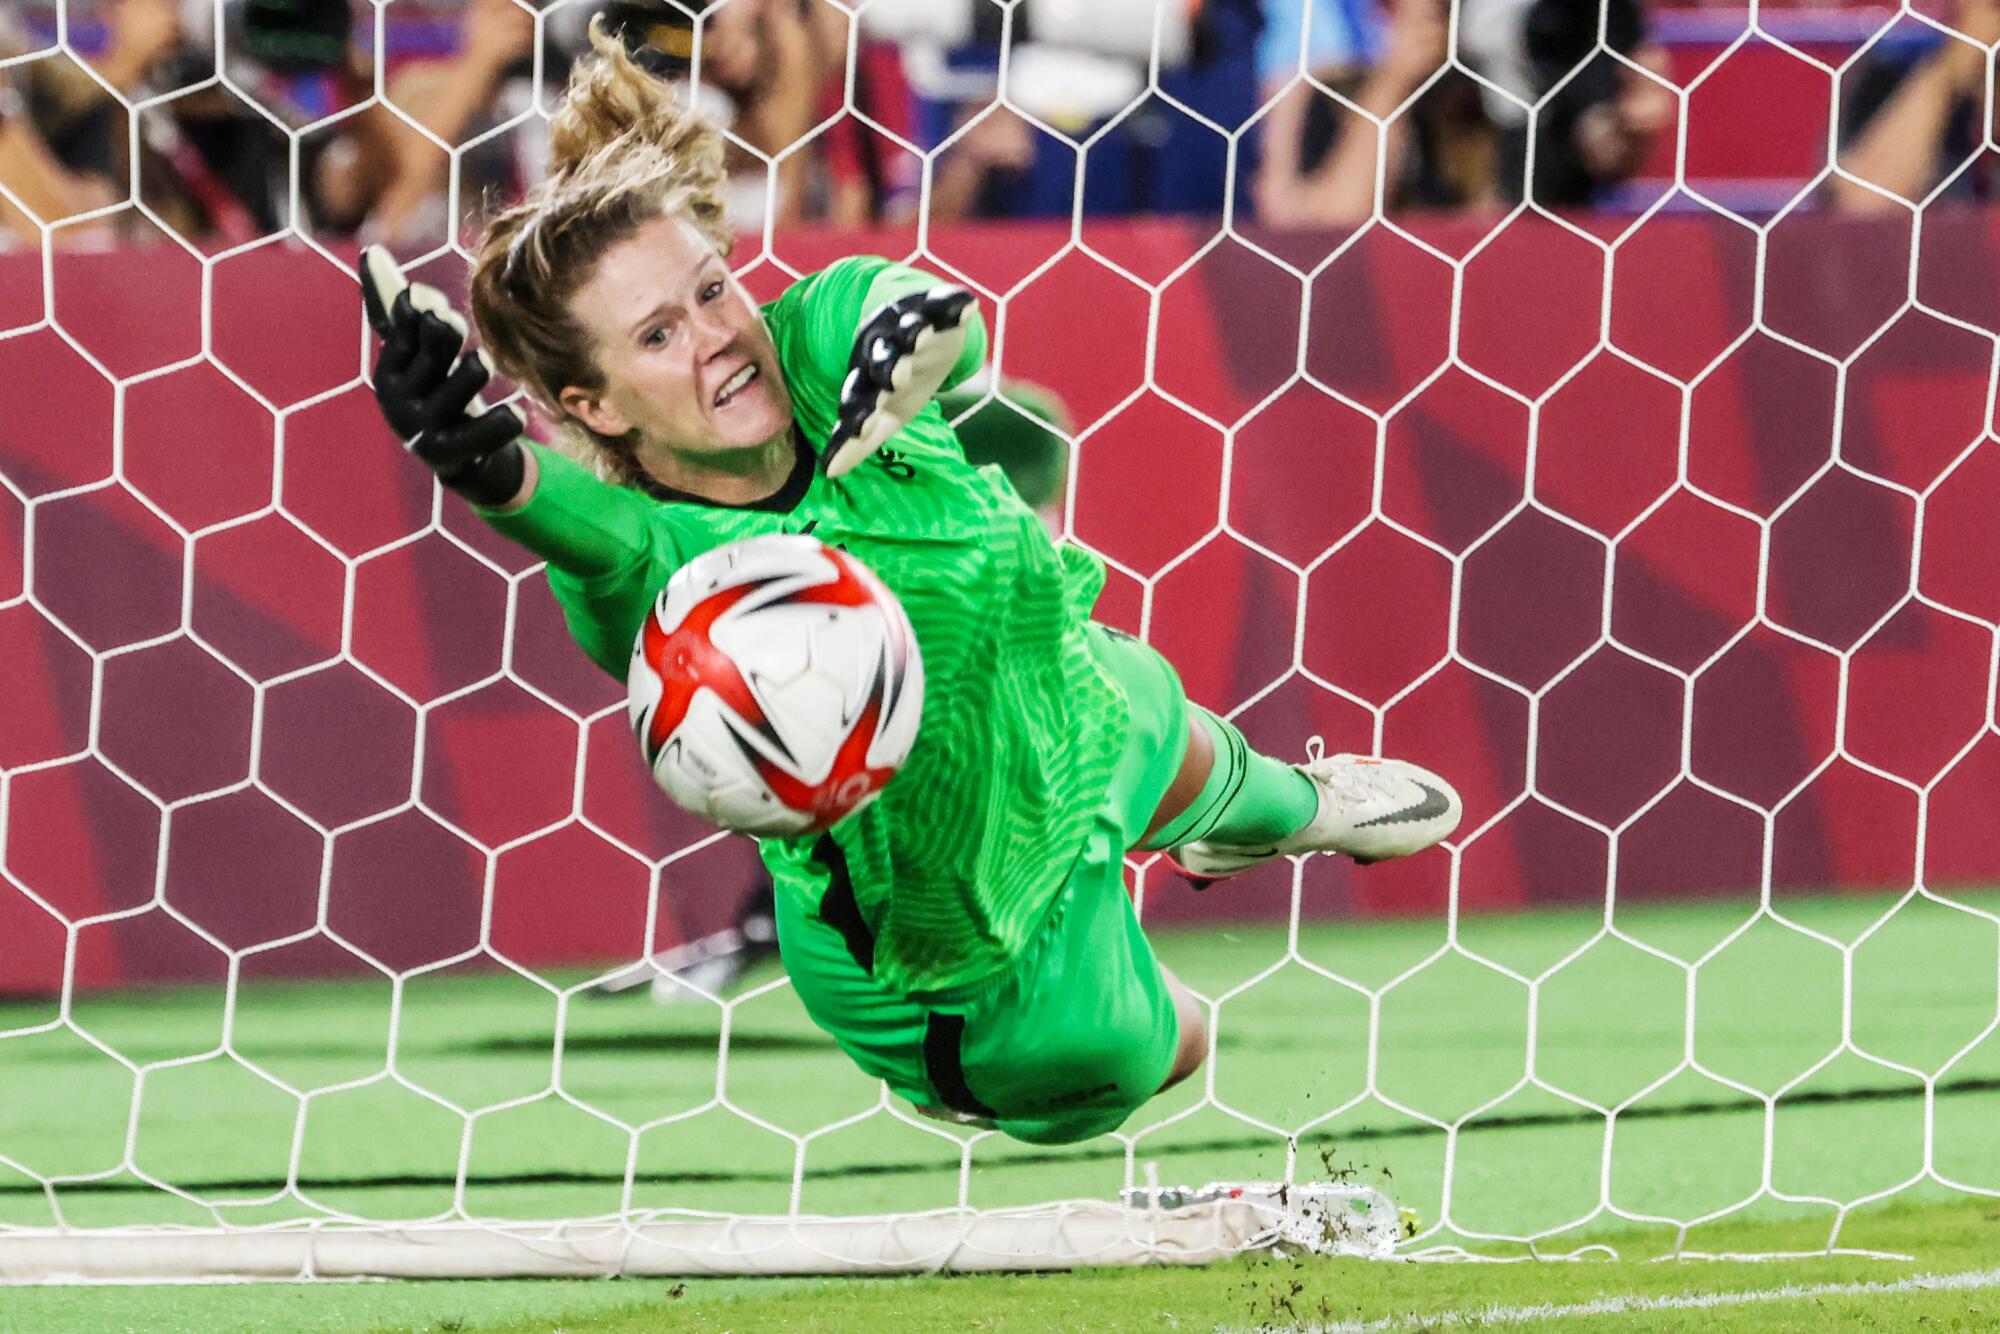 USA goalkeeper Alyssa Naeher lunges to make a save in front of the net.